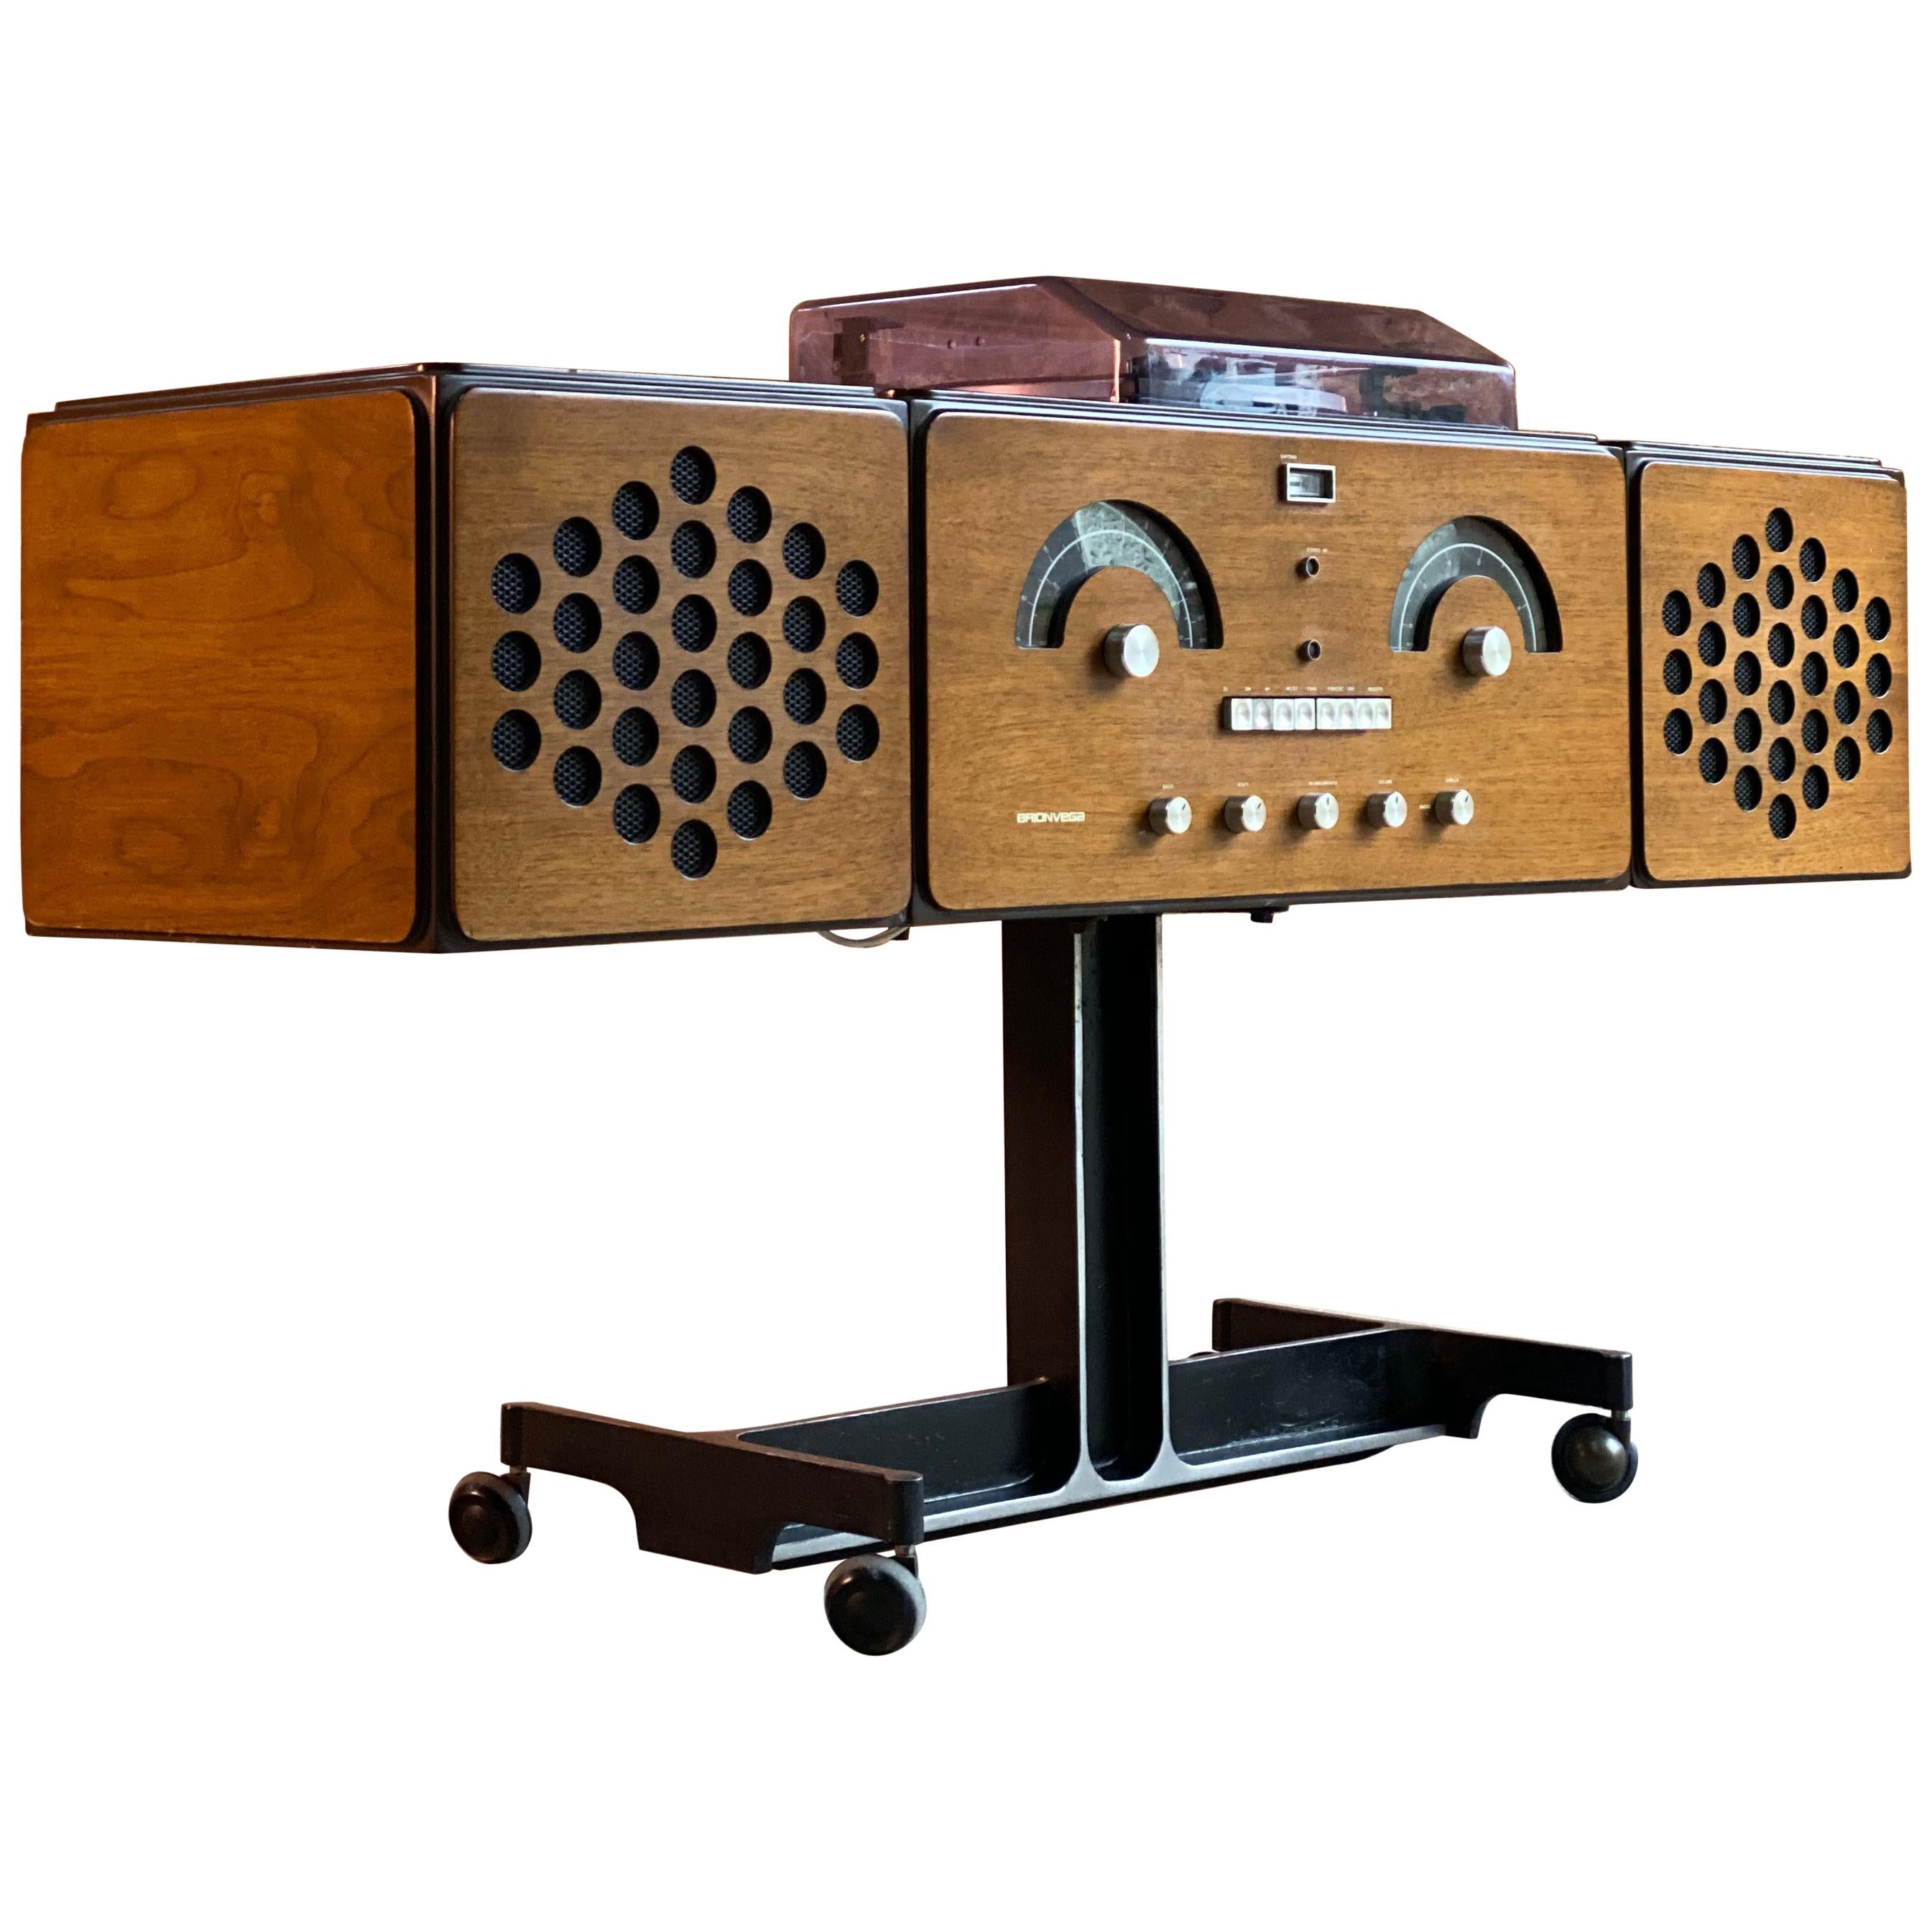 Brionvega RR126 Stereo System by Achille and Pier Giacomo Castiglioni,  Italy, 1965 at 1stDibs